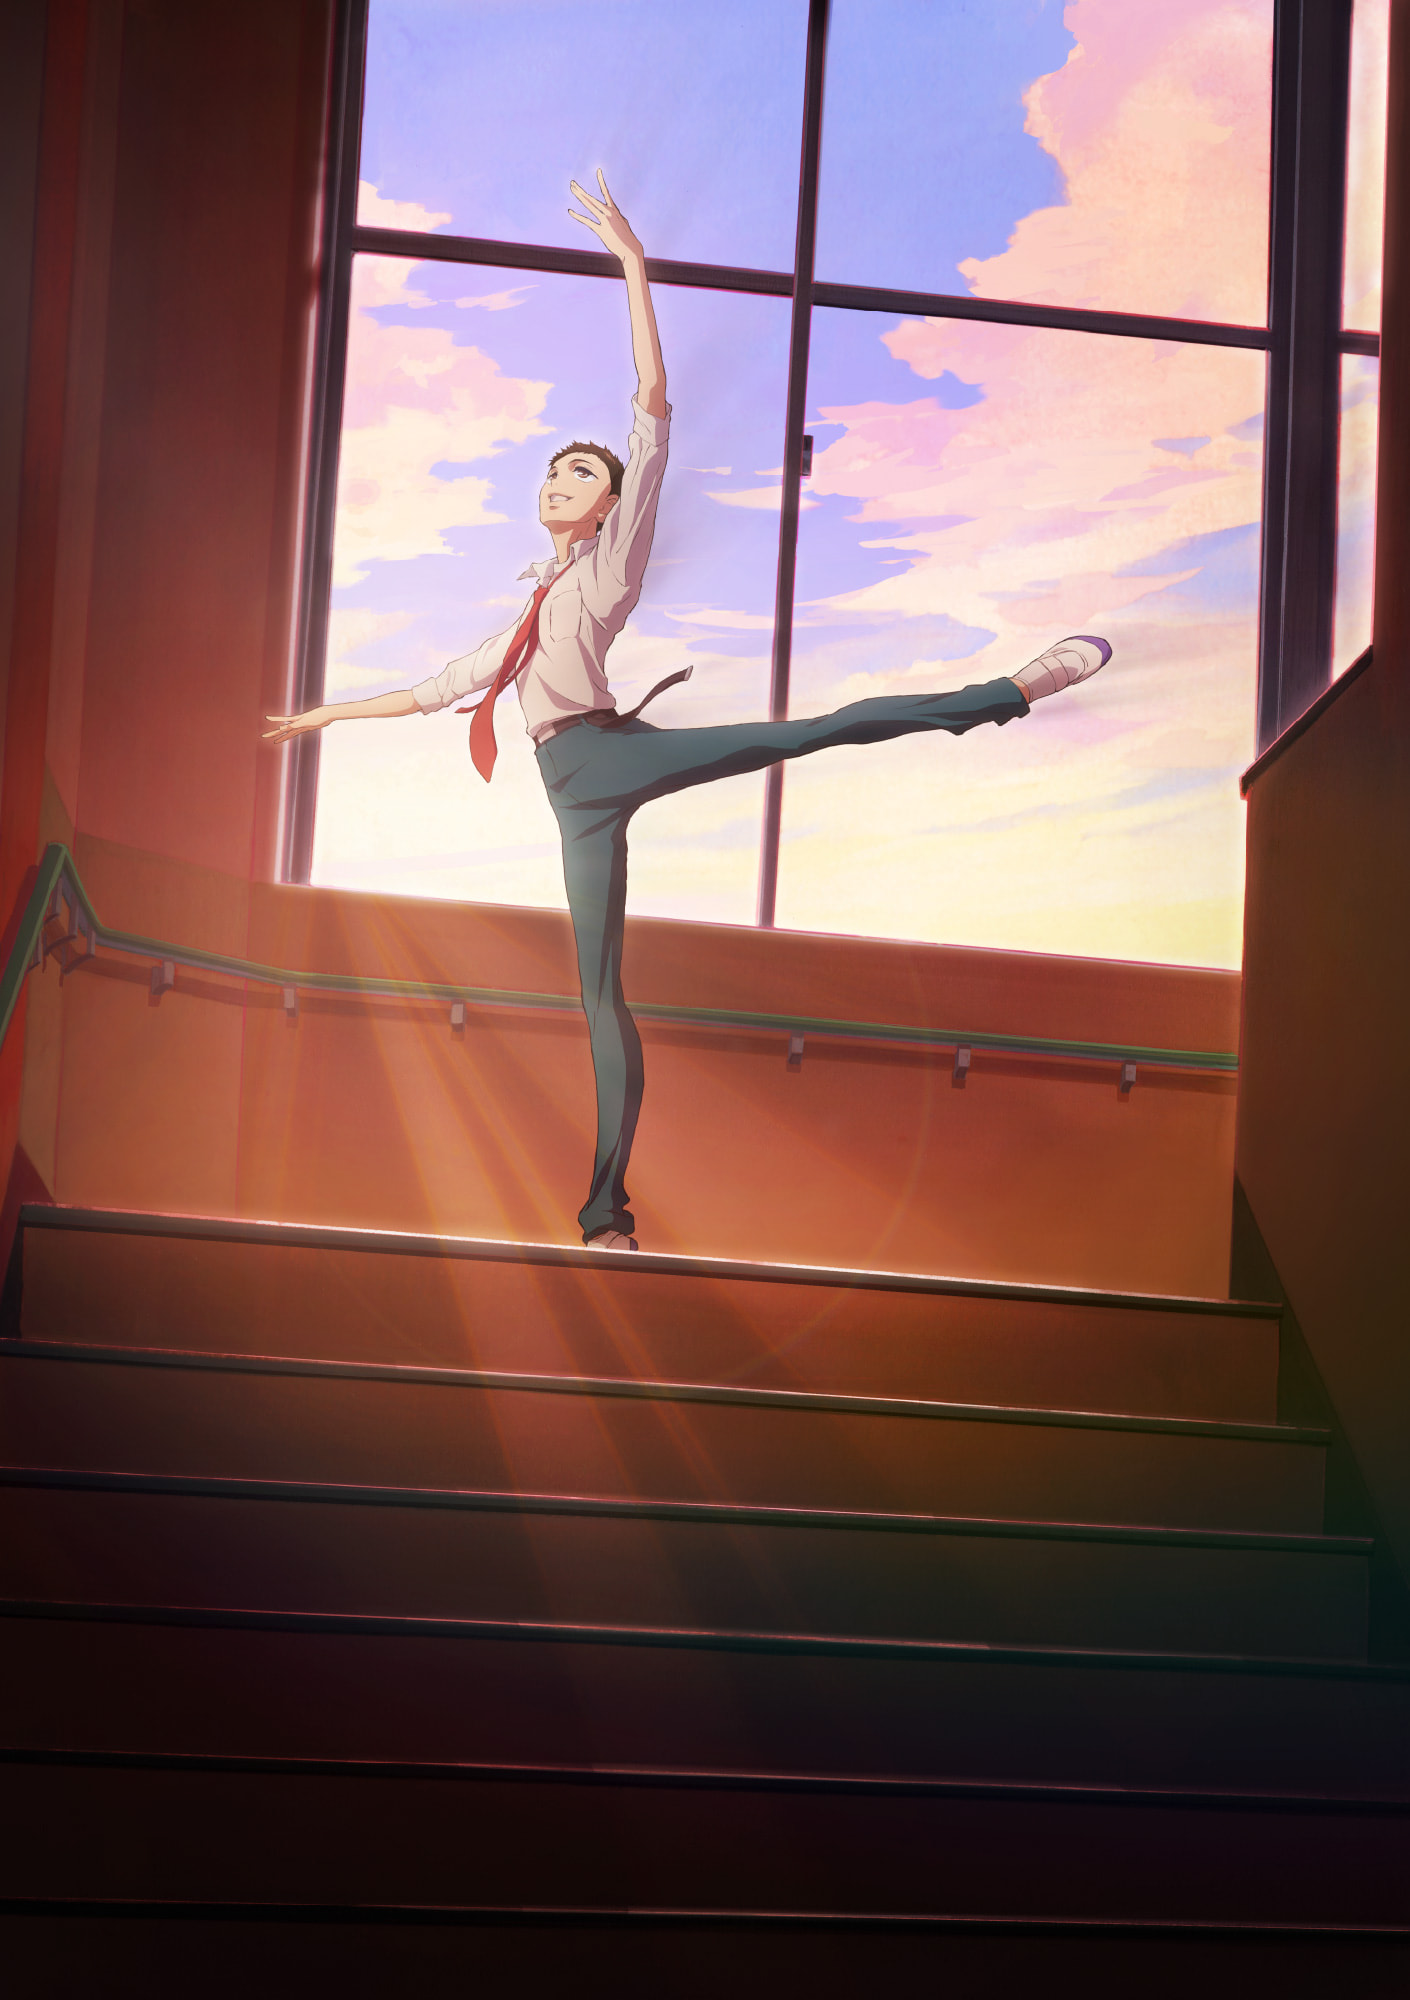 Dance Dance Danseur - All New Visual, Release Date, and More!